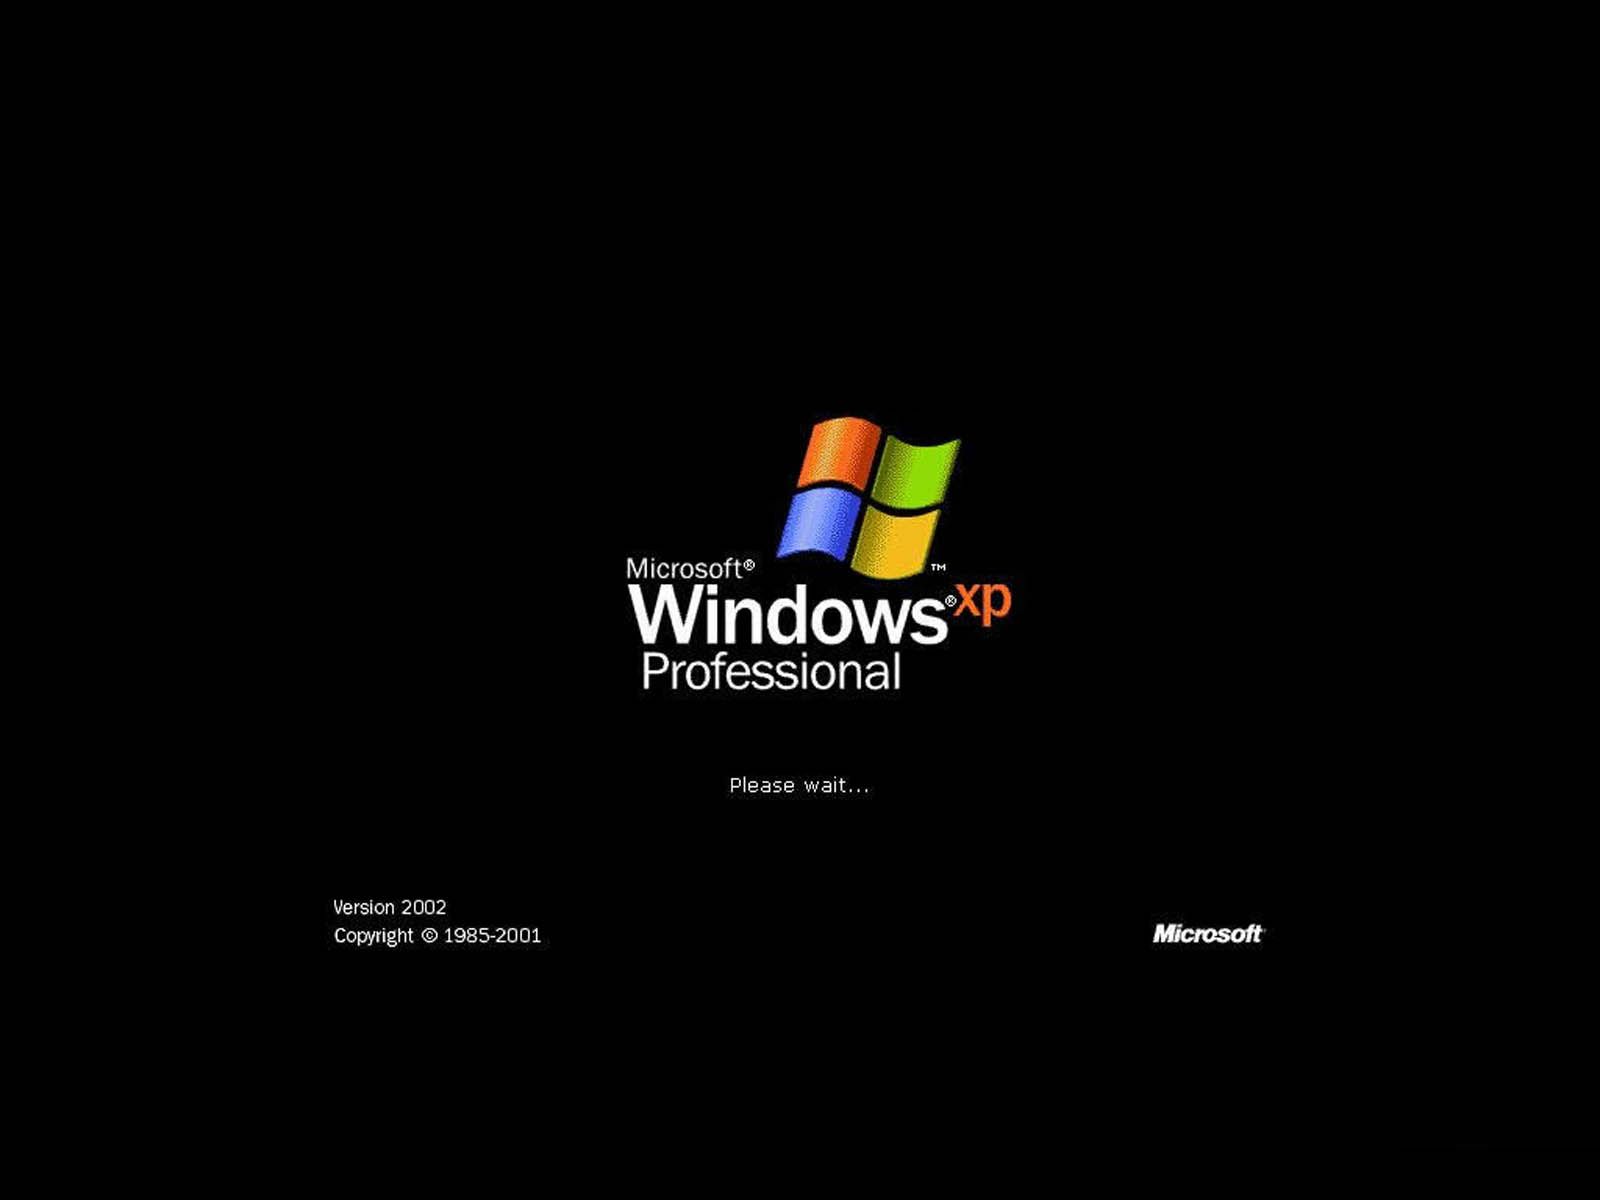 Windows Xp Wallpaper Awesome HDq